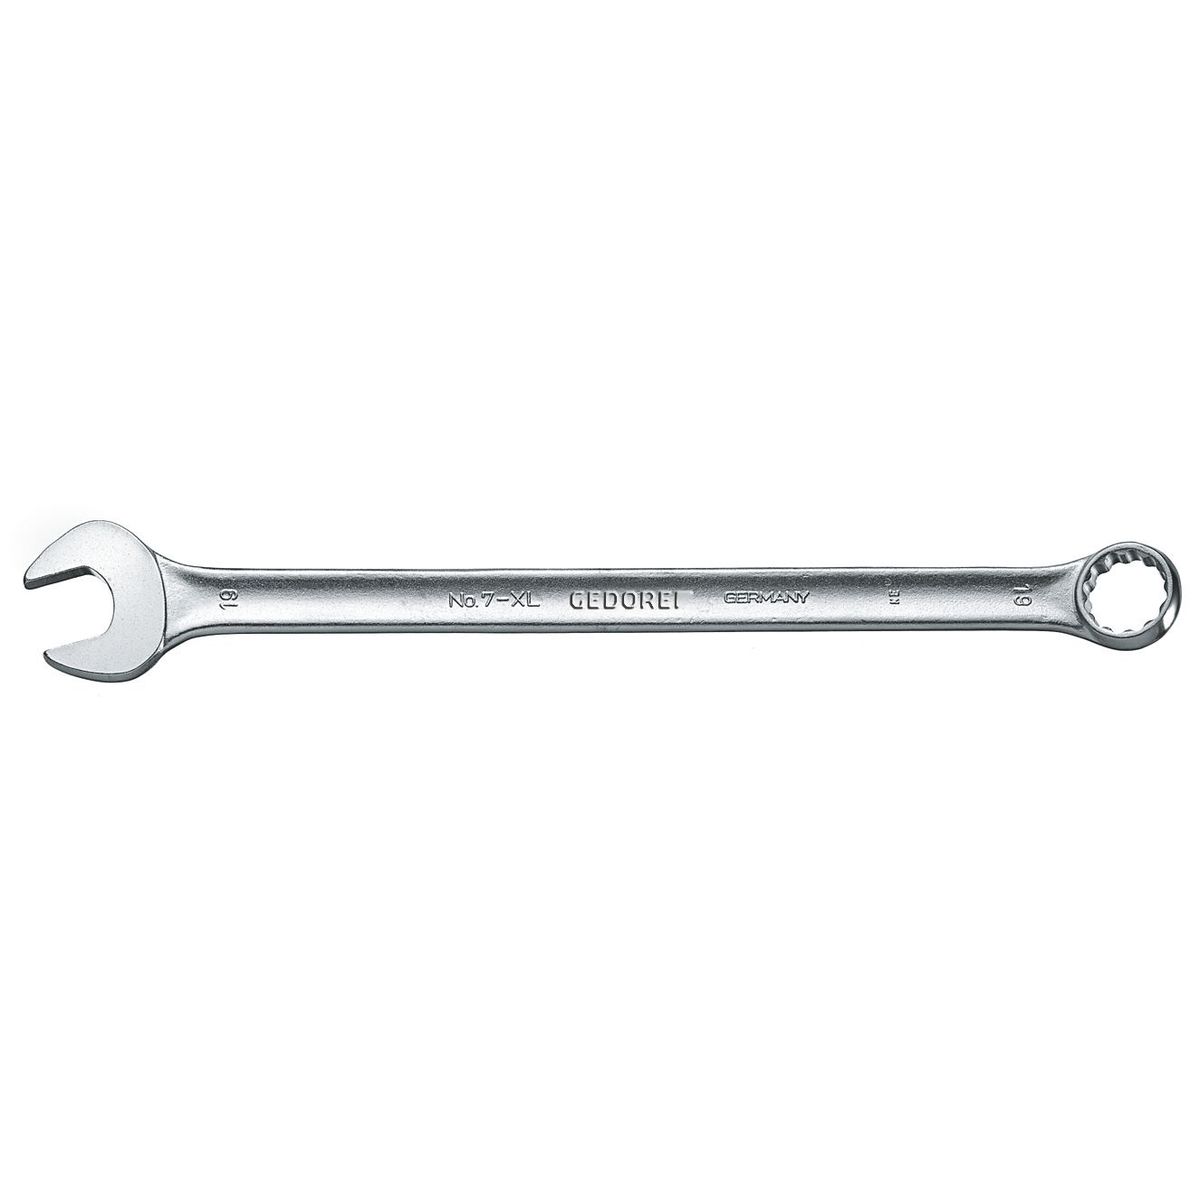 Combination spanner, extra long 10mm No.7 XL 10 Gedore